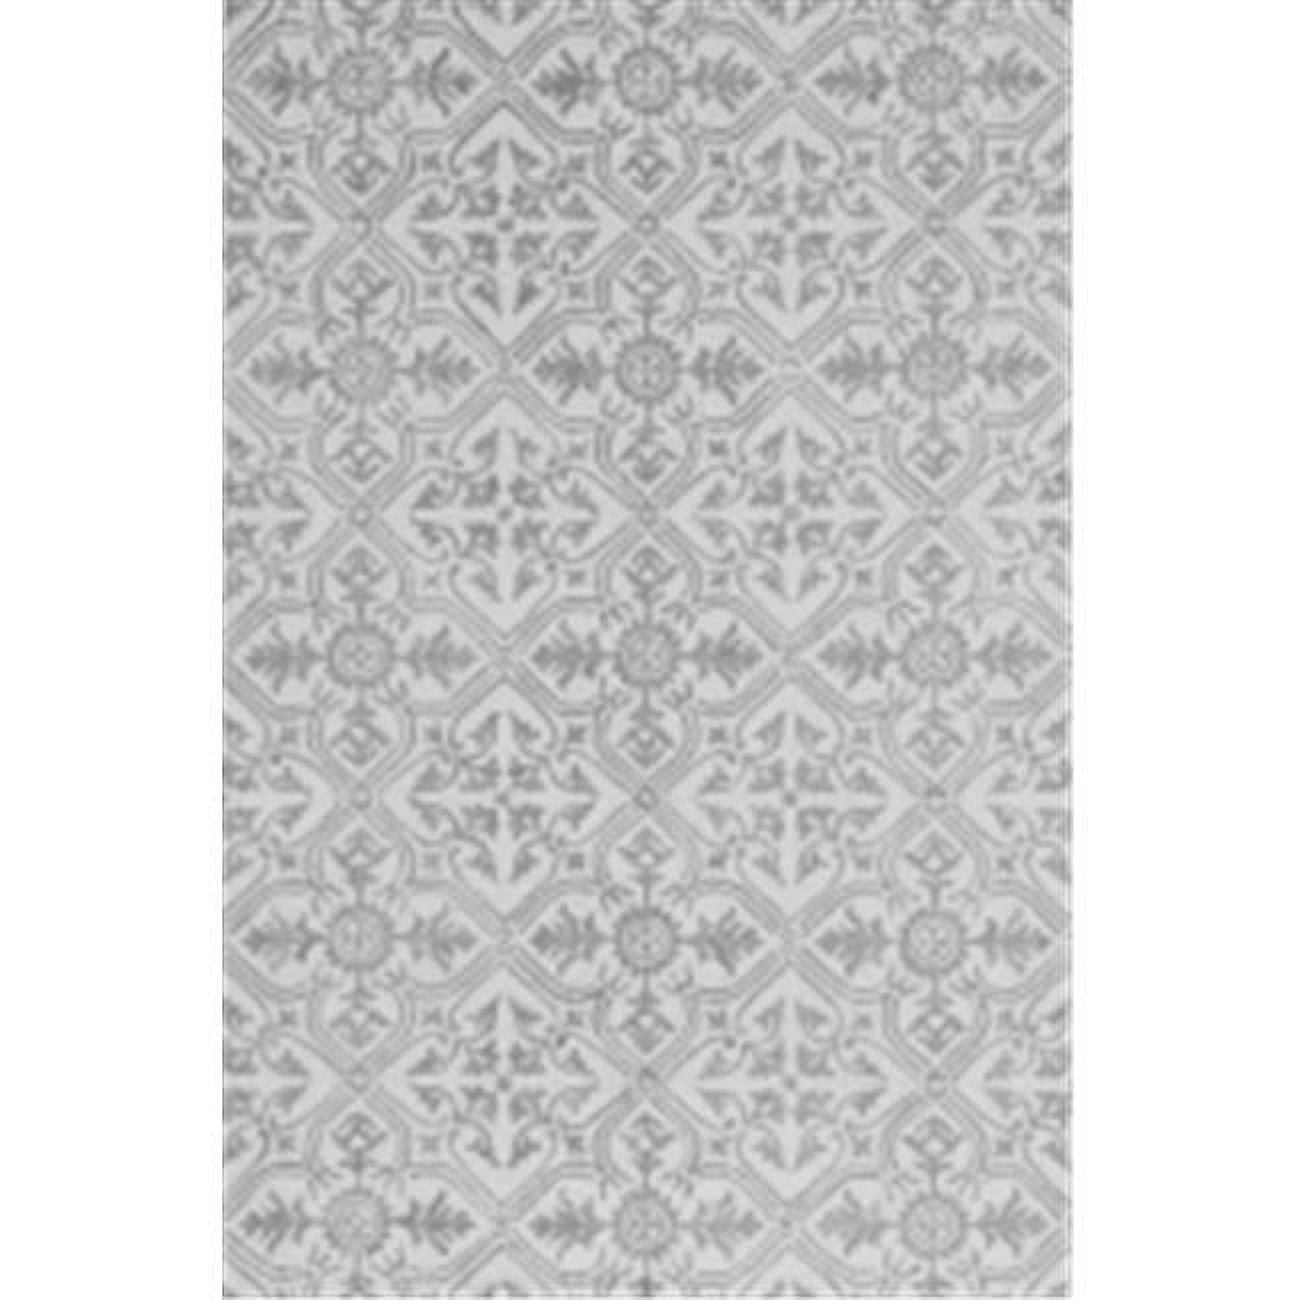 Picture of Dynamic Rugs GL467867100 Galleria Rugs, Beige - 3.3 x 5.3 in.